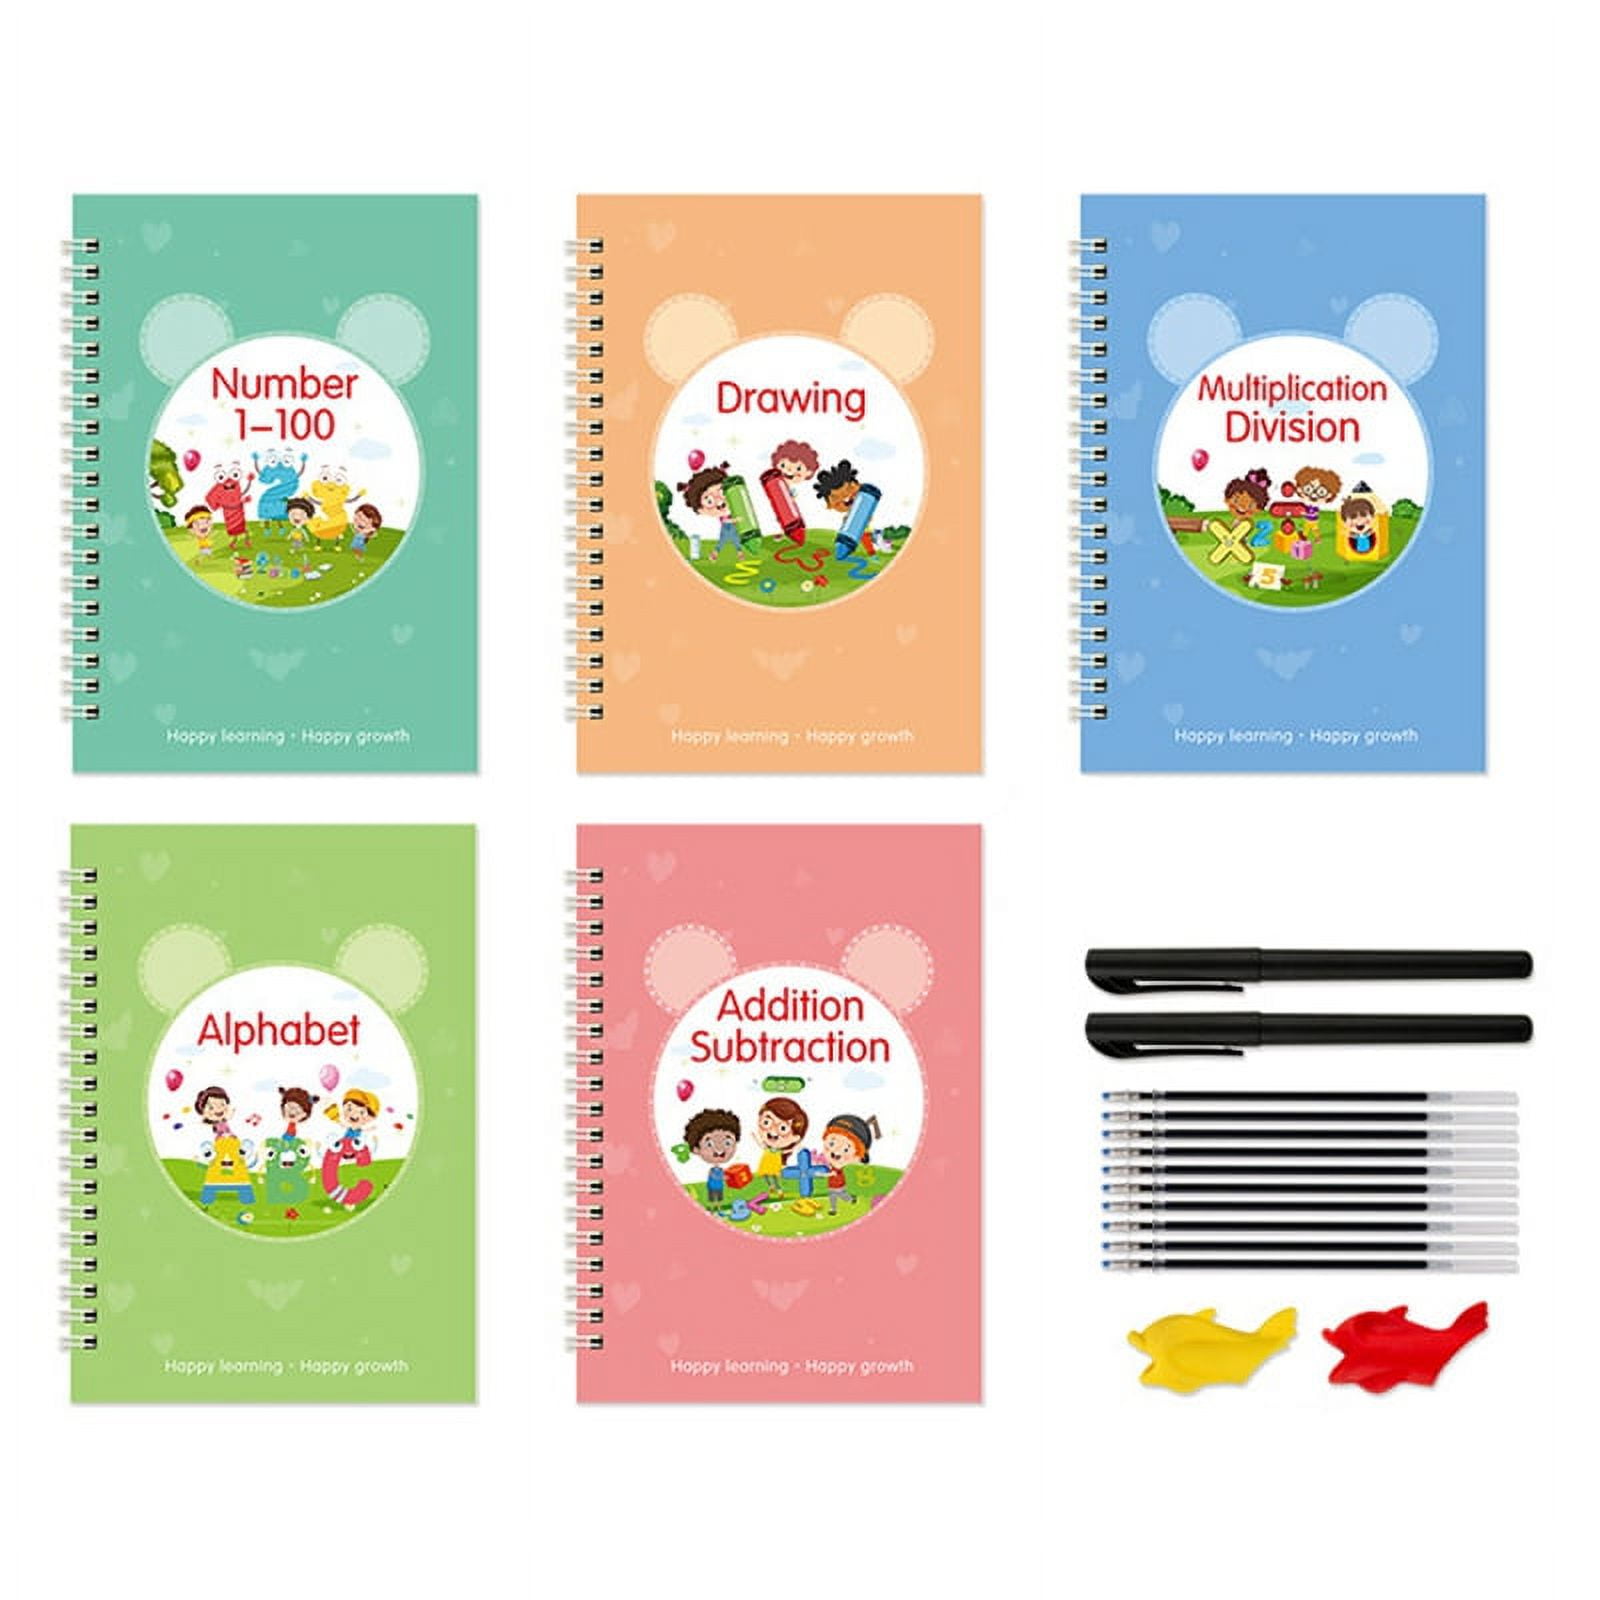 Practice Copybook English Tracing Grooves Design Kids Drawing Writing Book